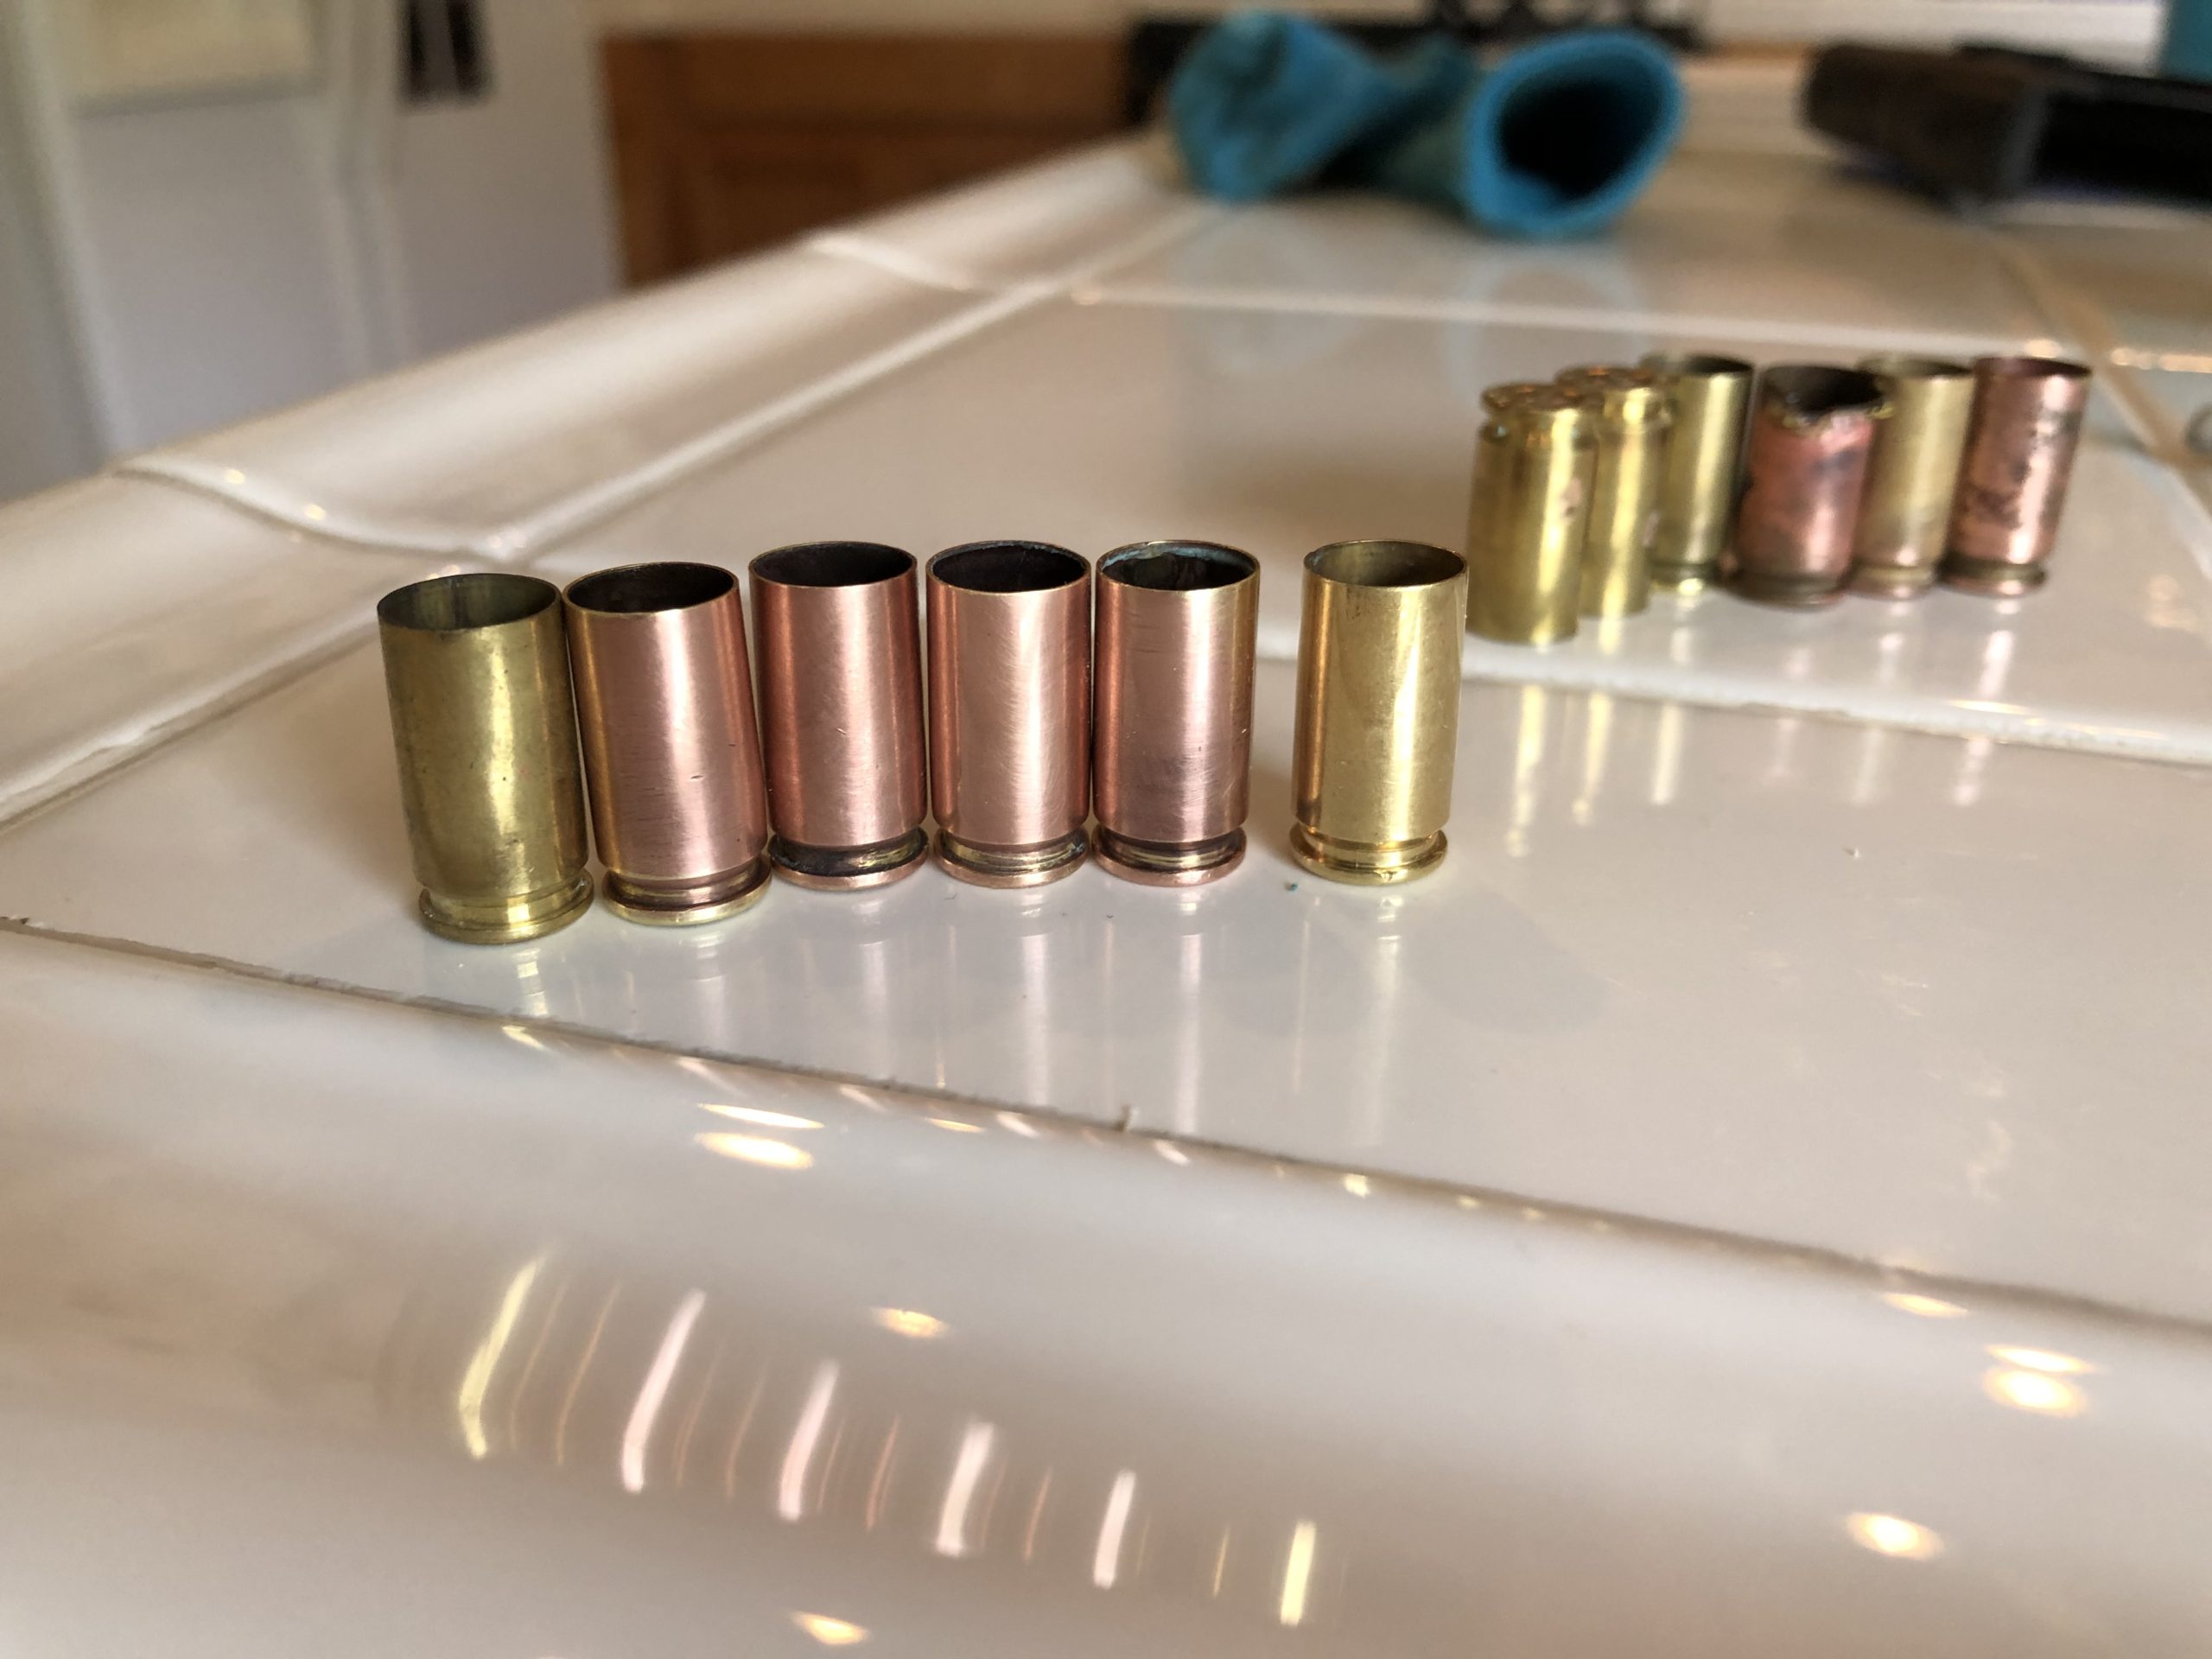 Copper-plated cases